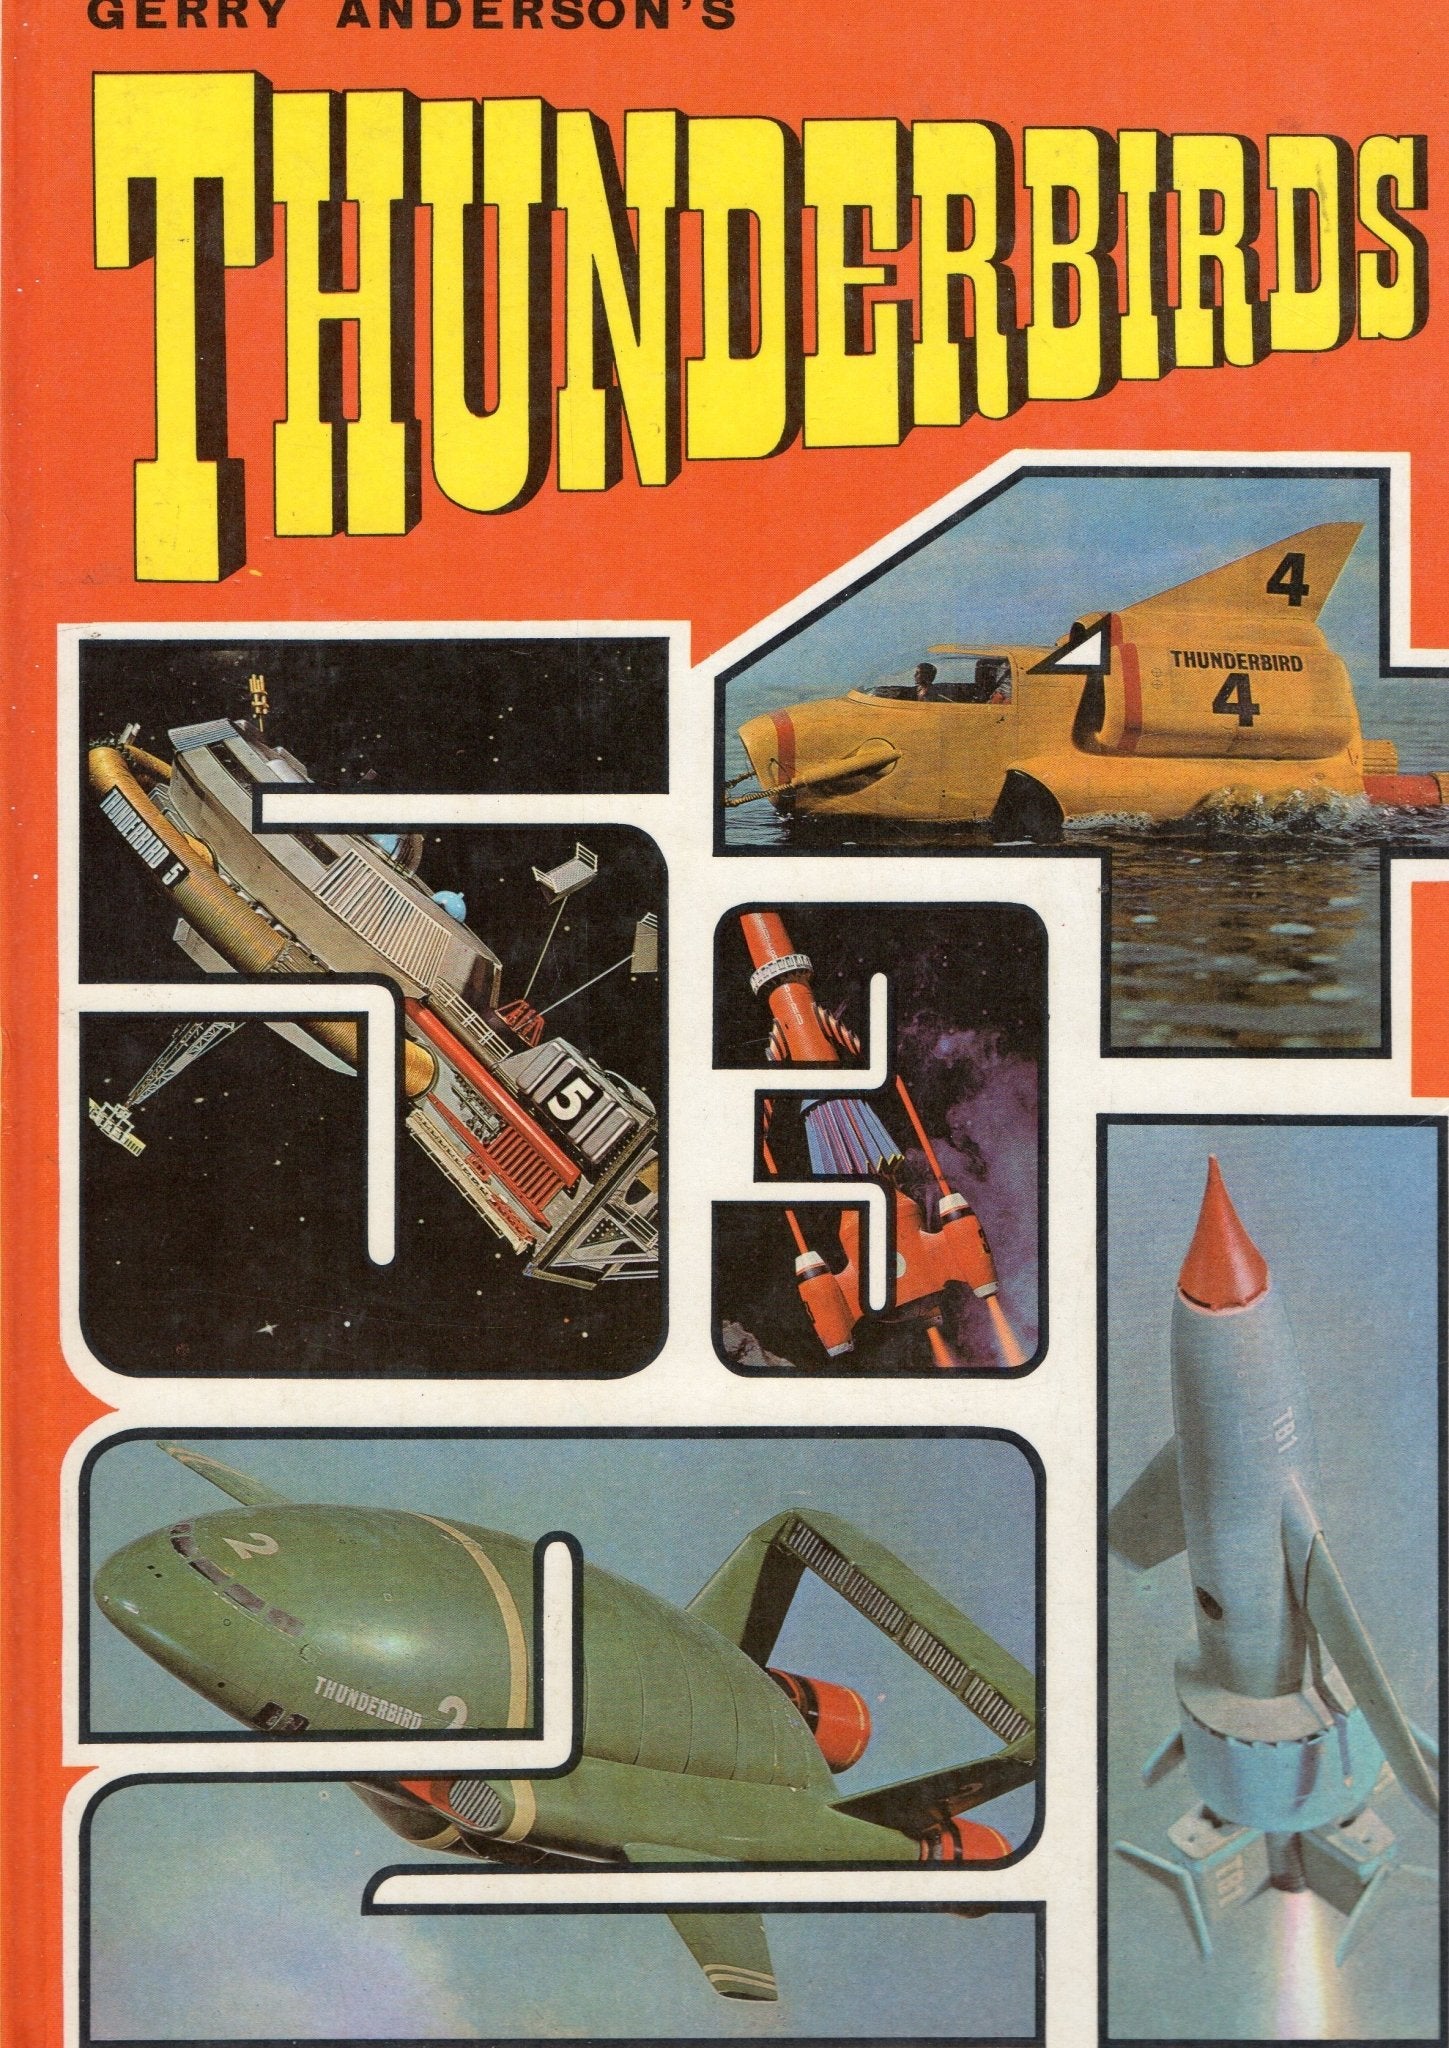 Thunderbirds Day Exclusive Audio Drama! - The Gerry Anderson Store